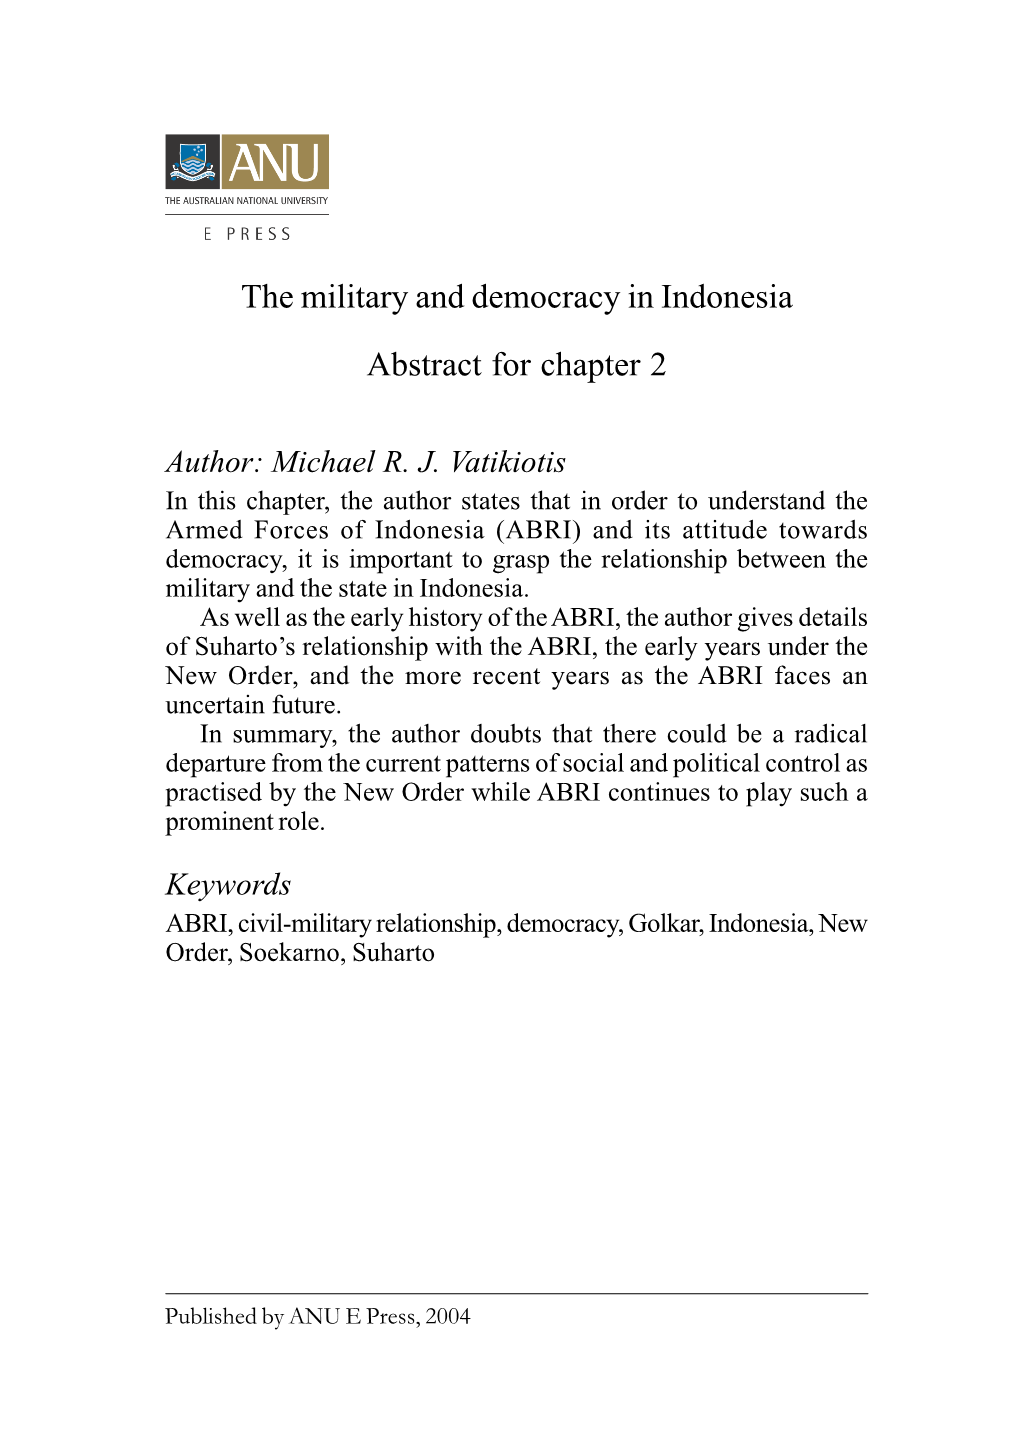 The Military and Democracy in Indonesia Abstract for Chapter 2